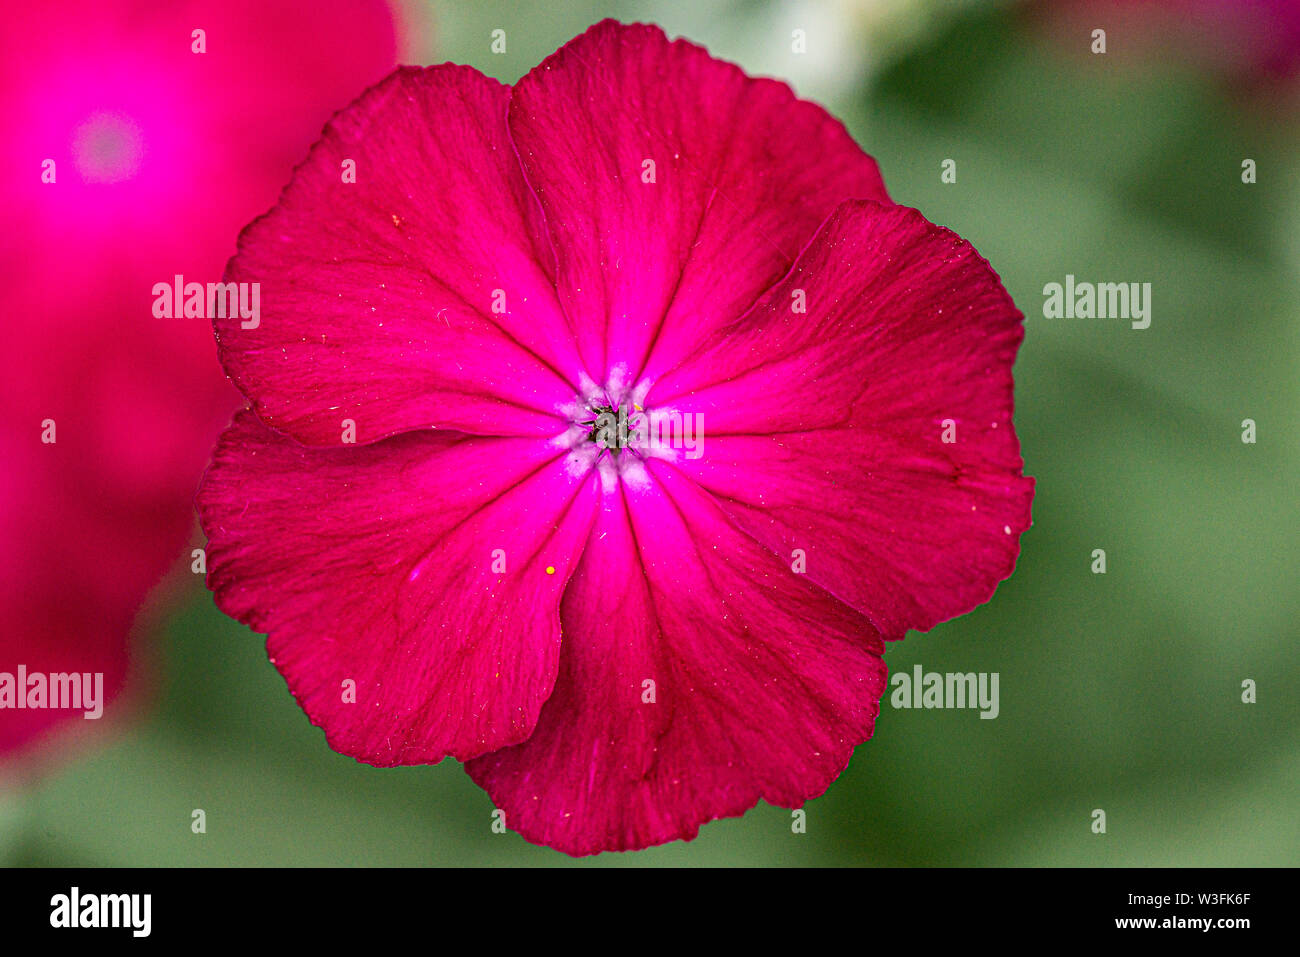 The flower of a rose campion (Lychnis coronaria) Stock Photo